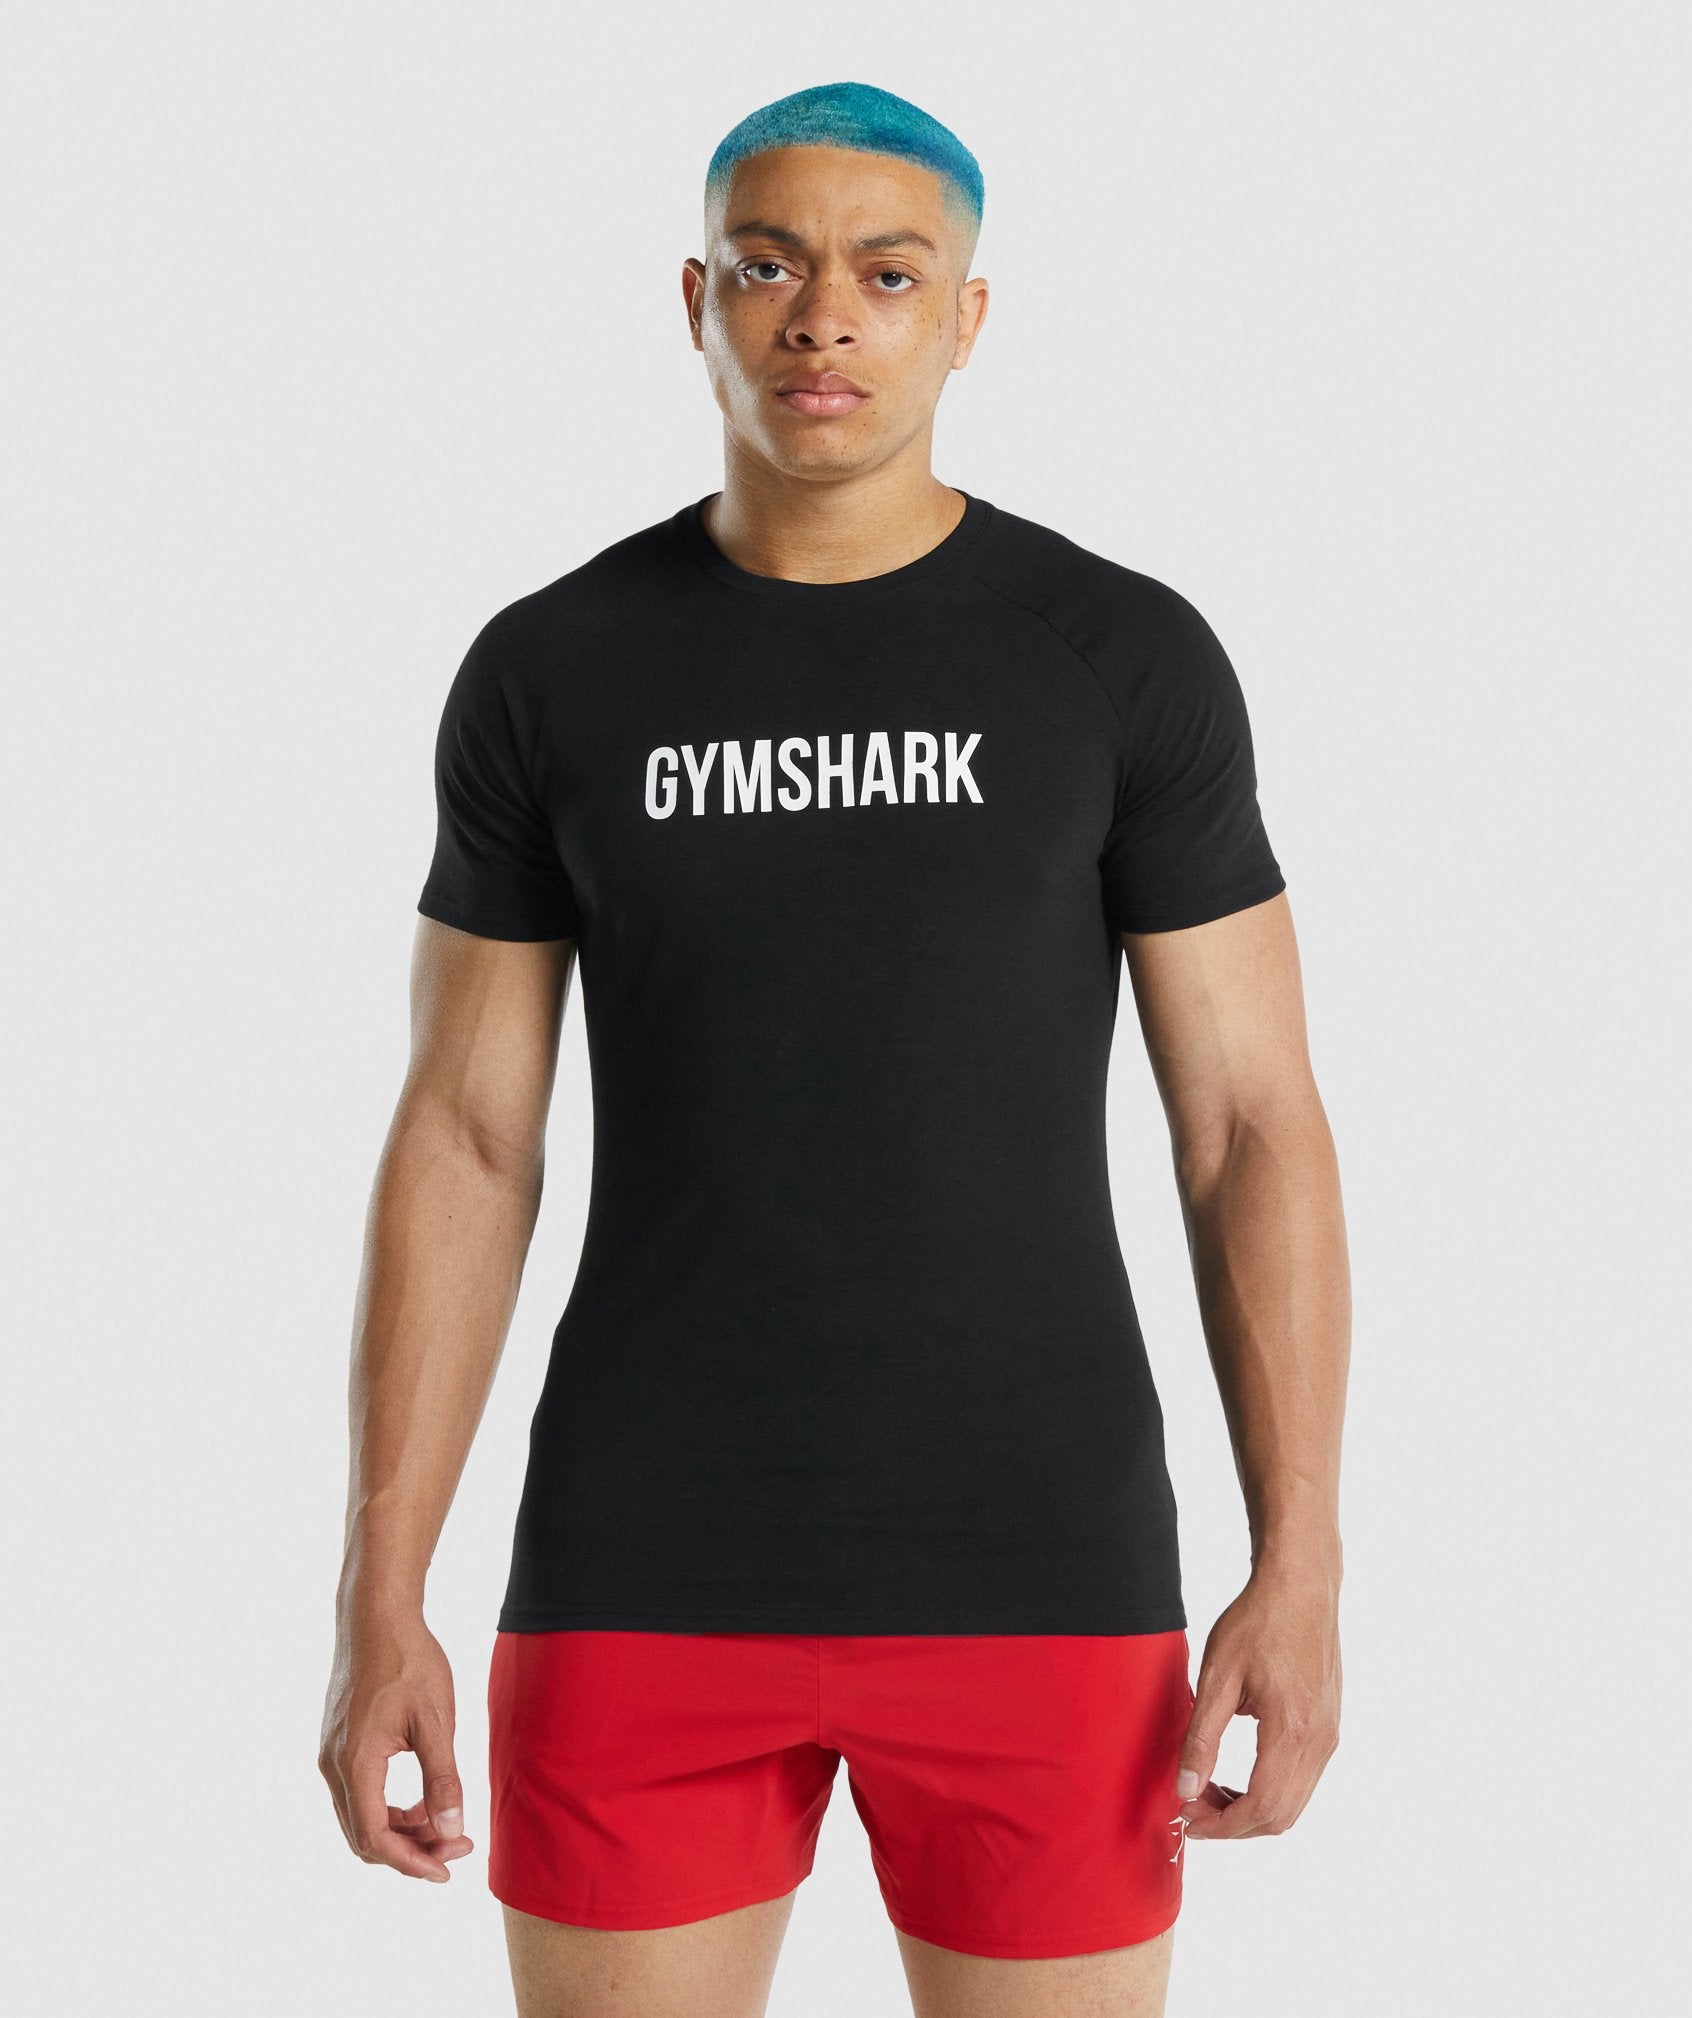 Gymshark Apollo SS T-Shirt Black/White Extra Large XL New With Tags  Athletic